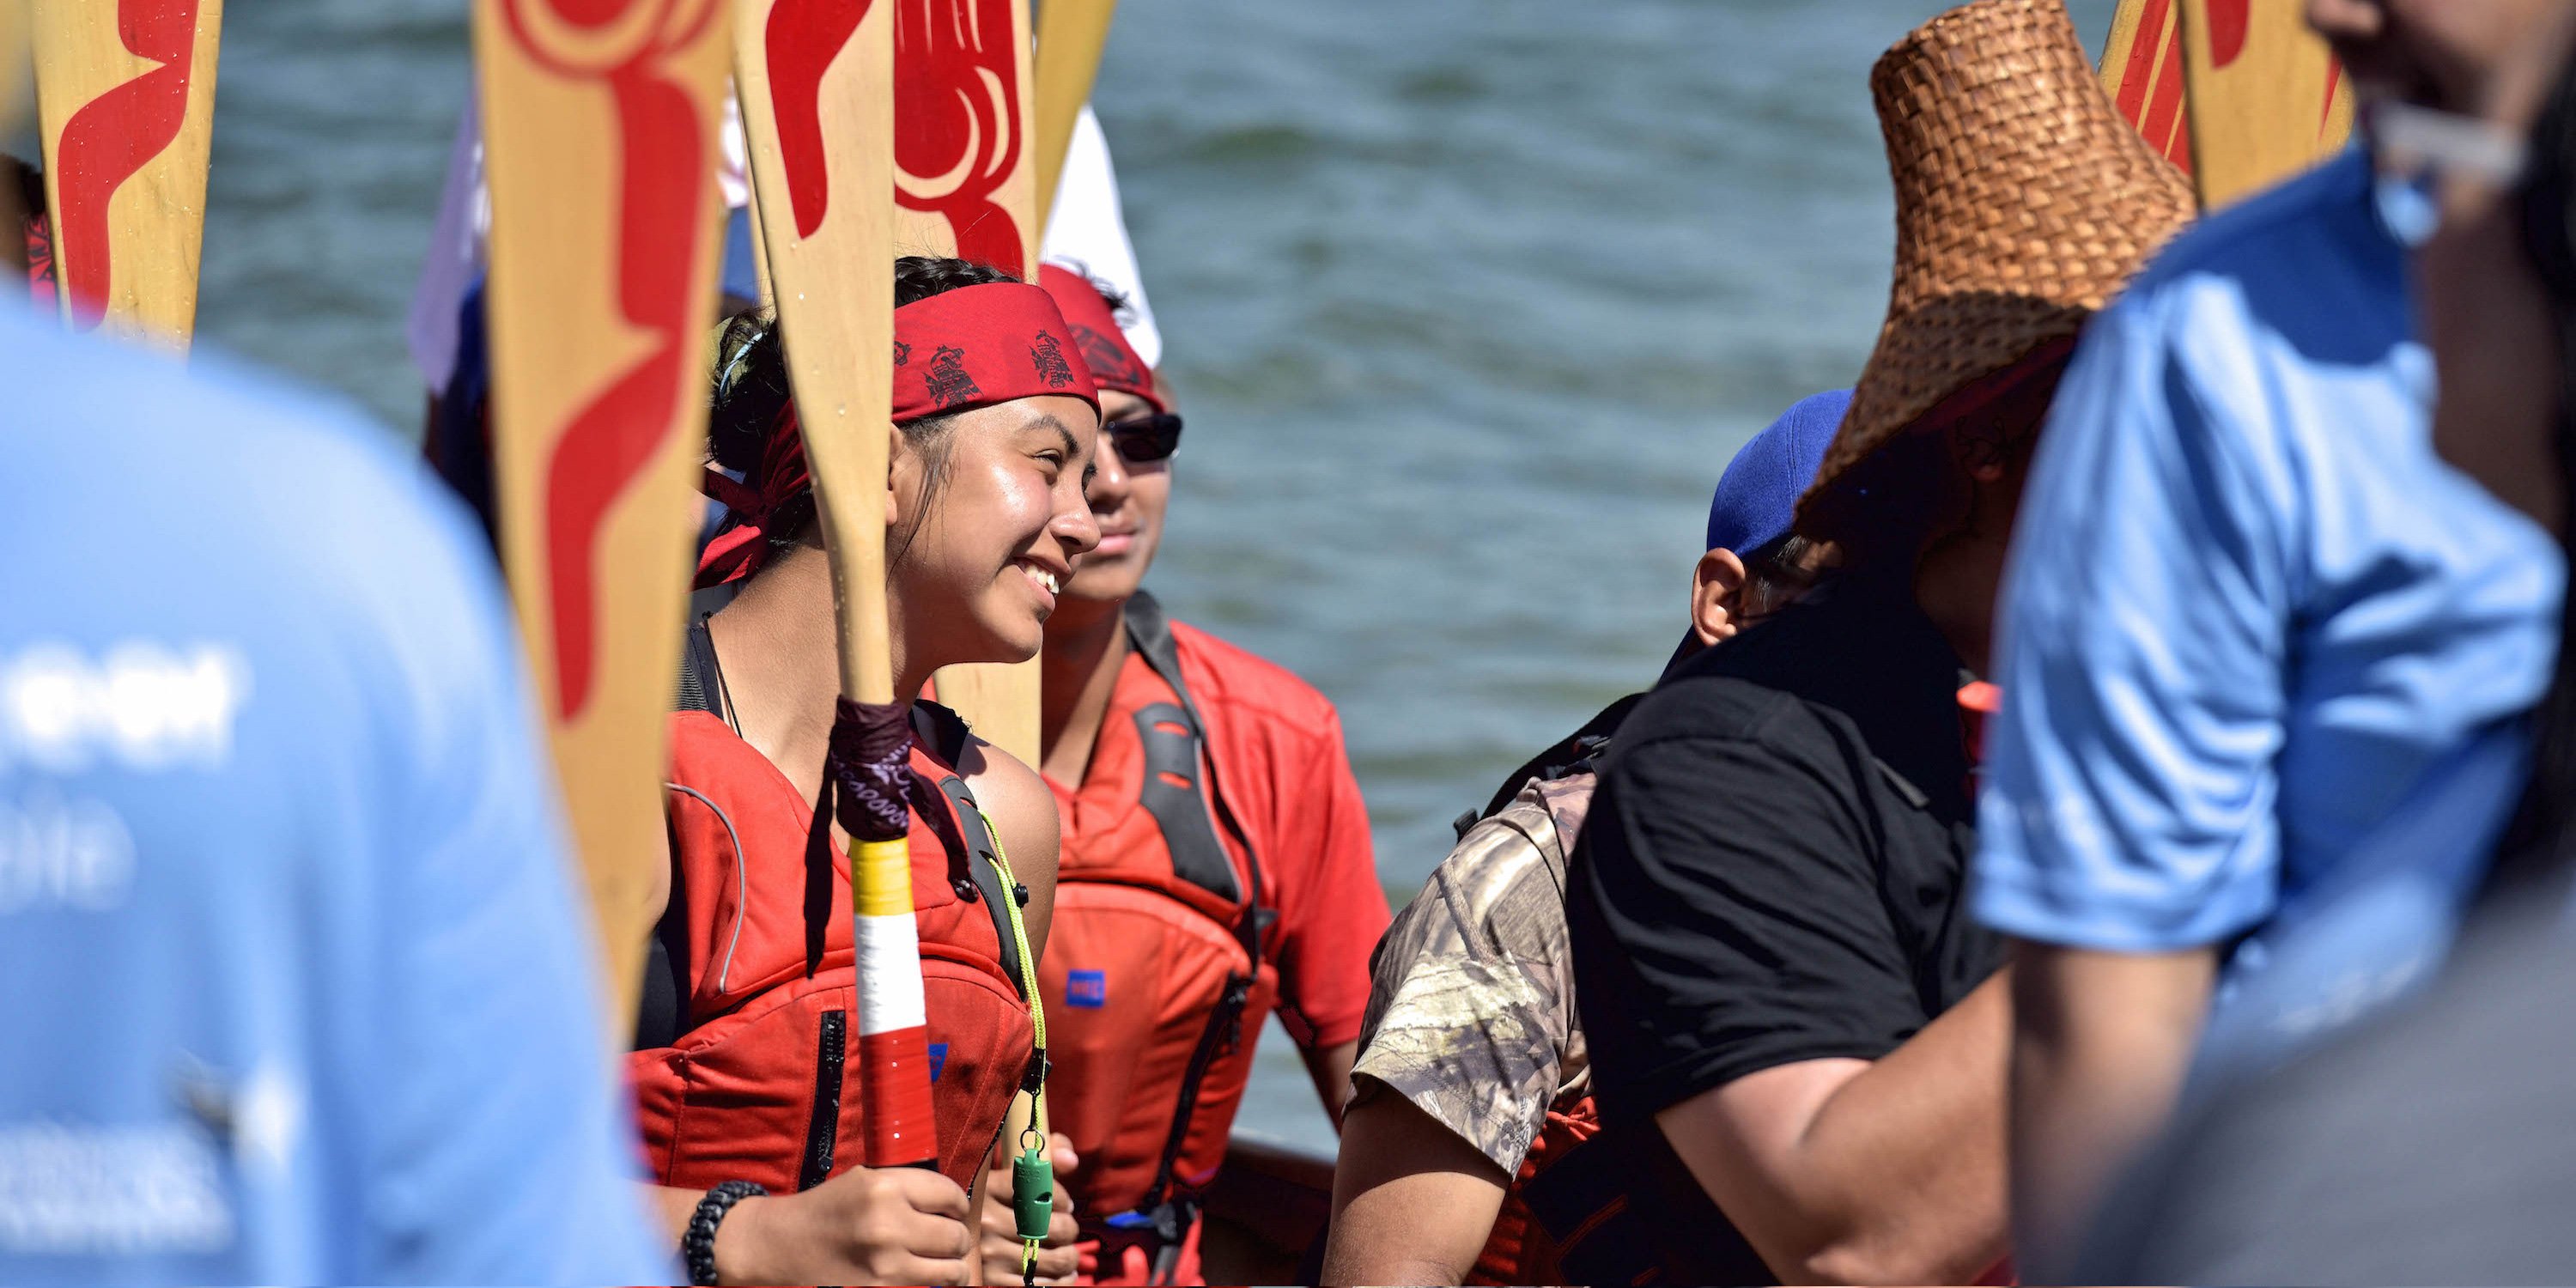 Become a Mentor to Indigenous Youth as a Part of Your Reconciliation Journey